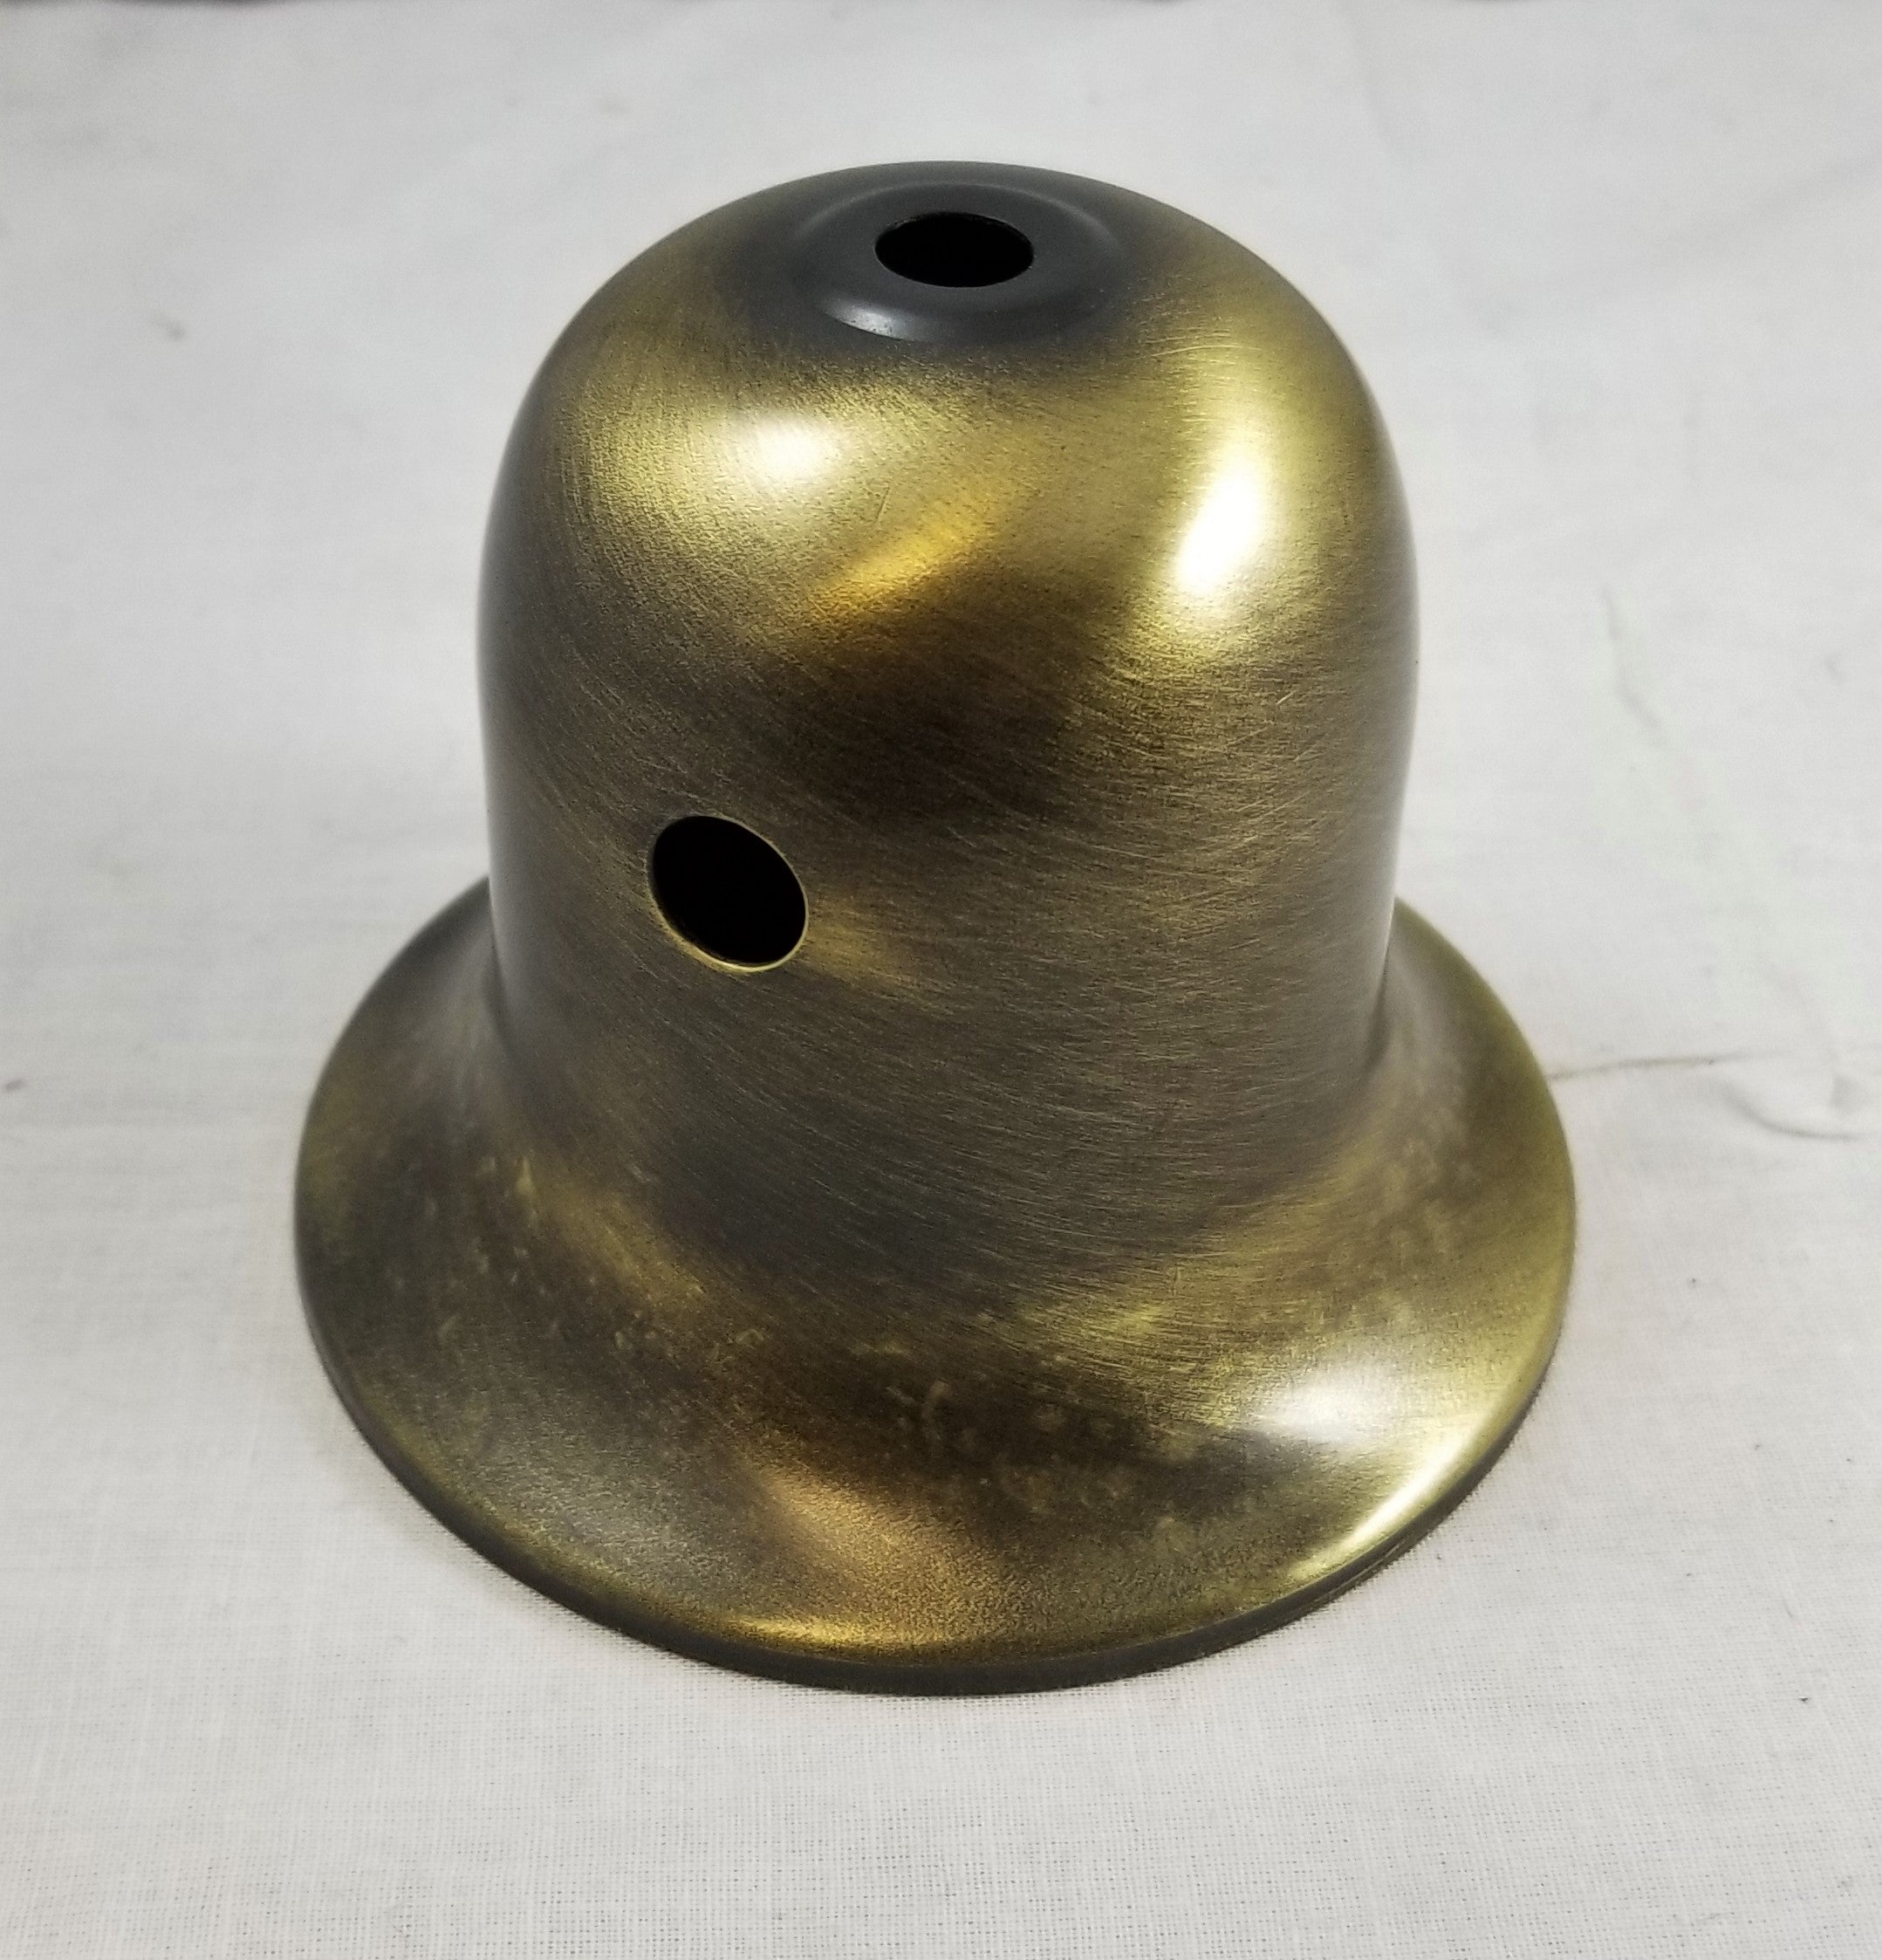 Antique Brass Holder for a 2-5/8" Fitter